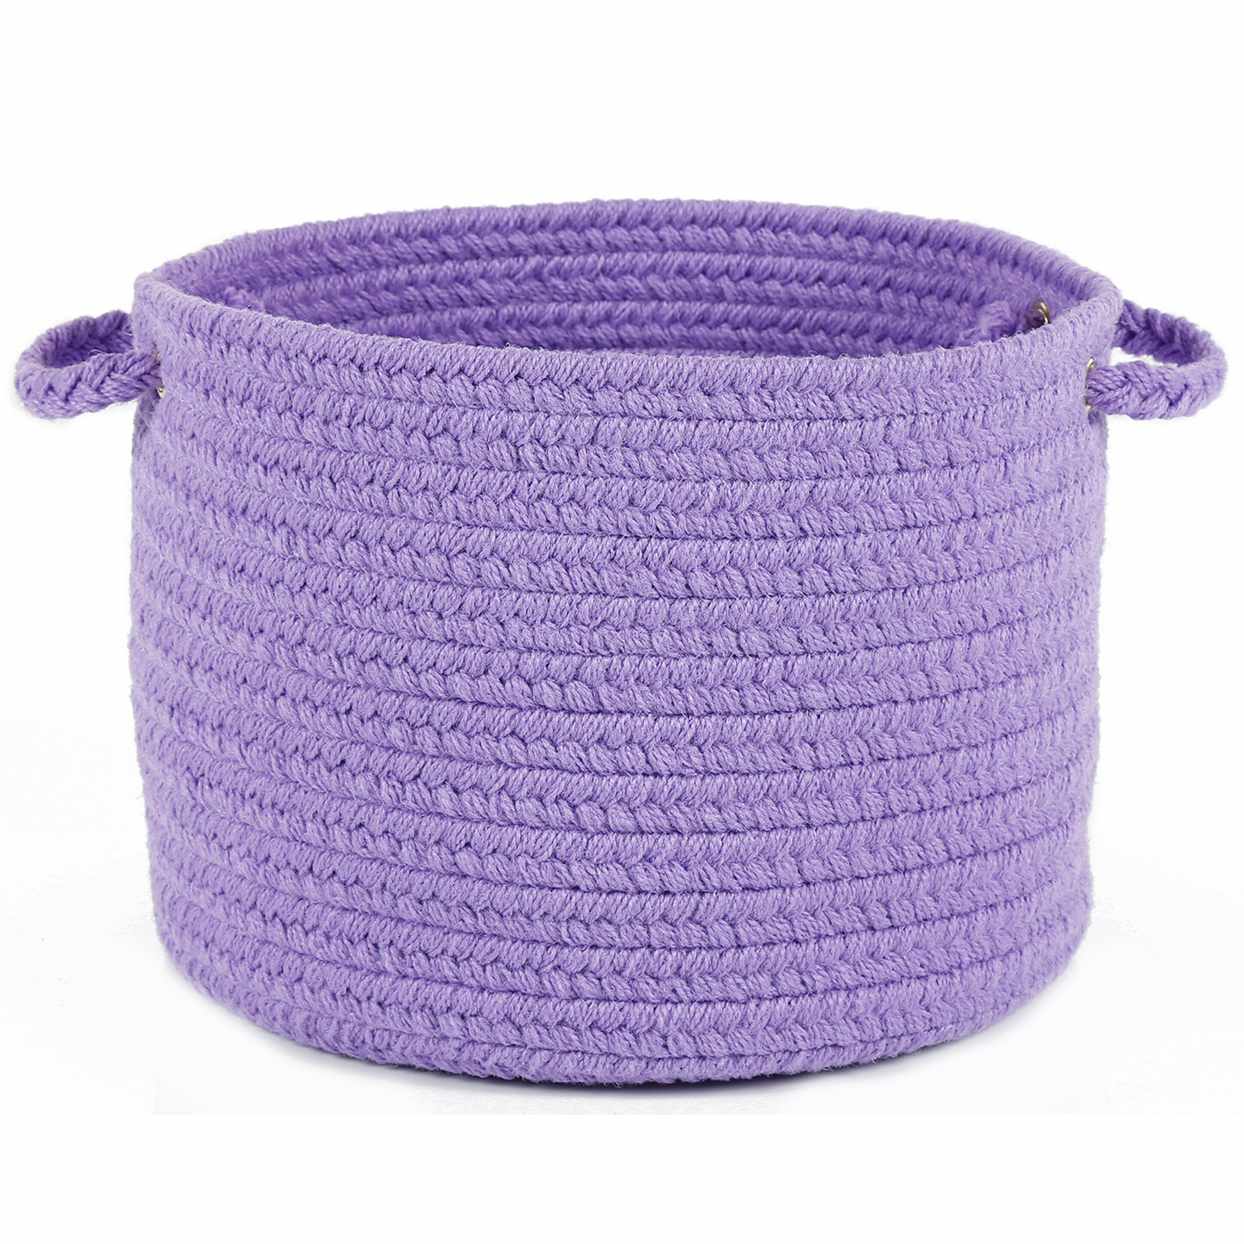 purple woven fabric basket with handles